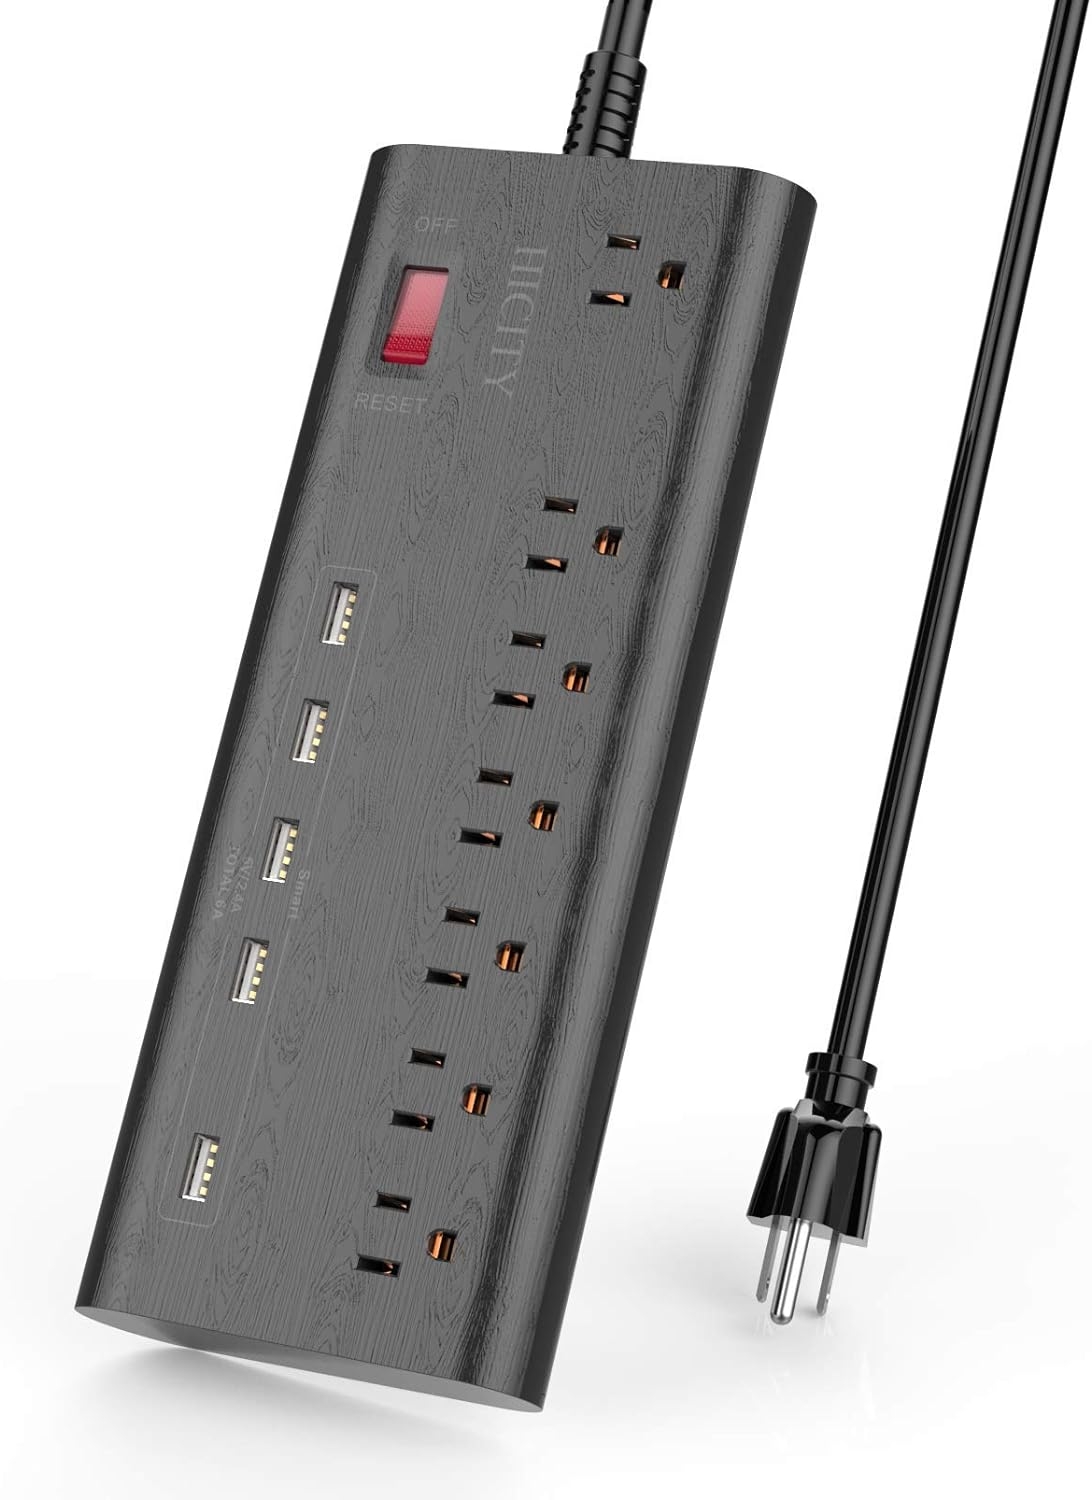 Power Strip Surge Protector with 5 USB Ports (30W/6A) and 7 Outlets (1625W/13A), 2100 Joules, 6ft Heavy Duty Extension Cord, HICITY Wall Mountable Multiplug for Home & Office - Black